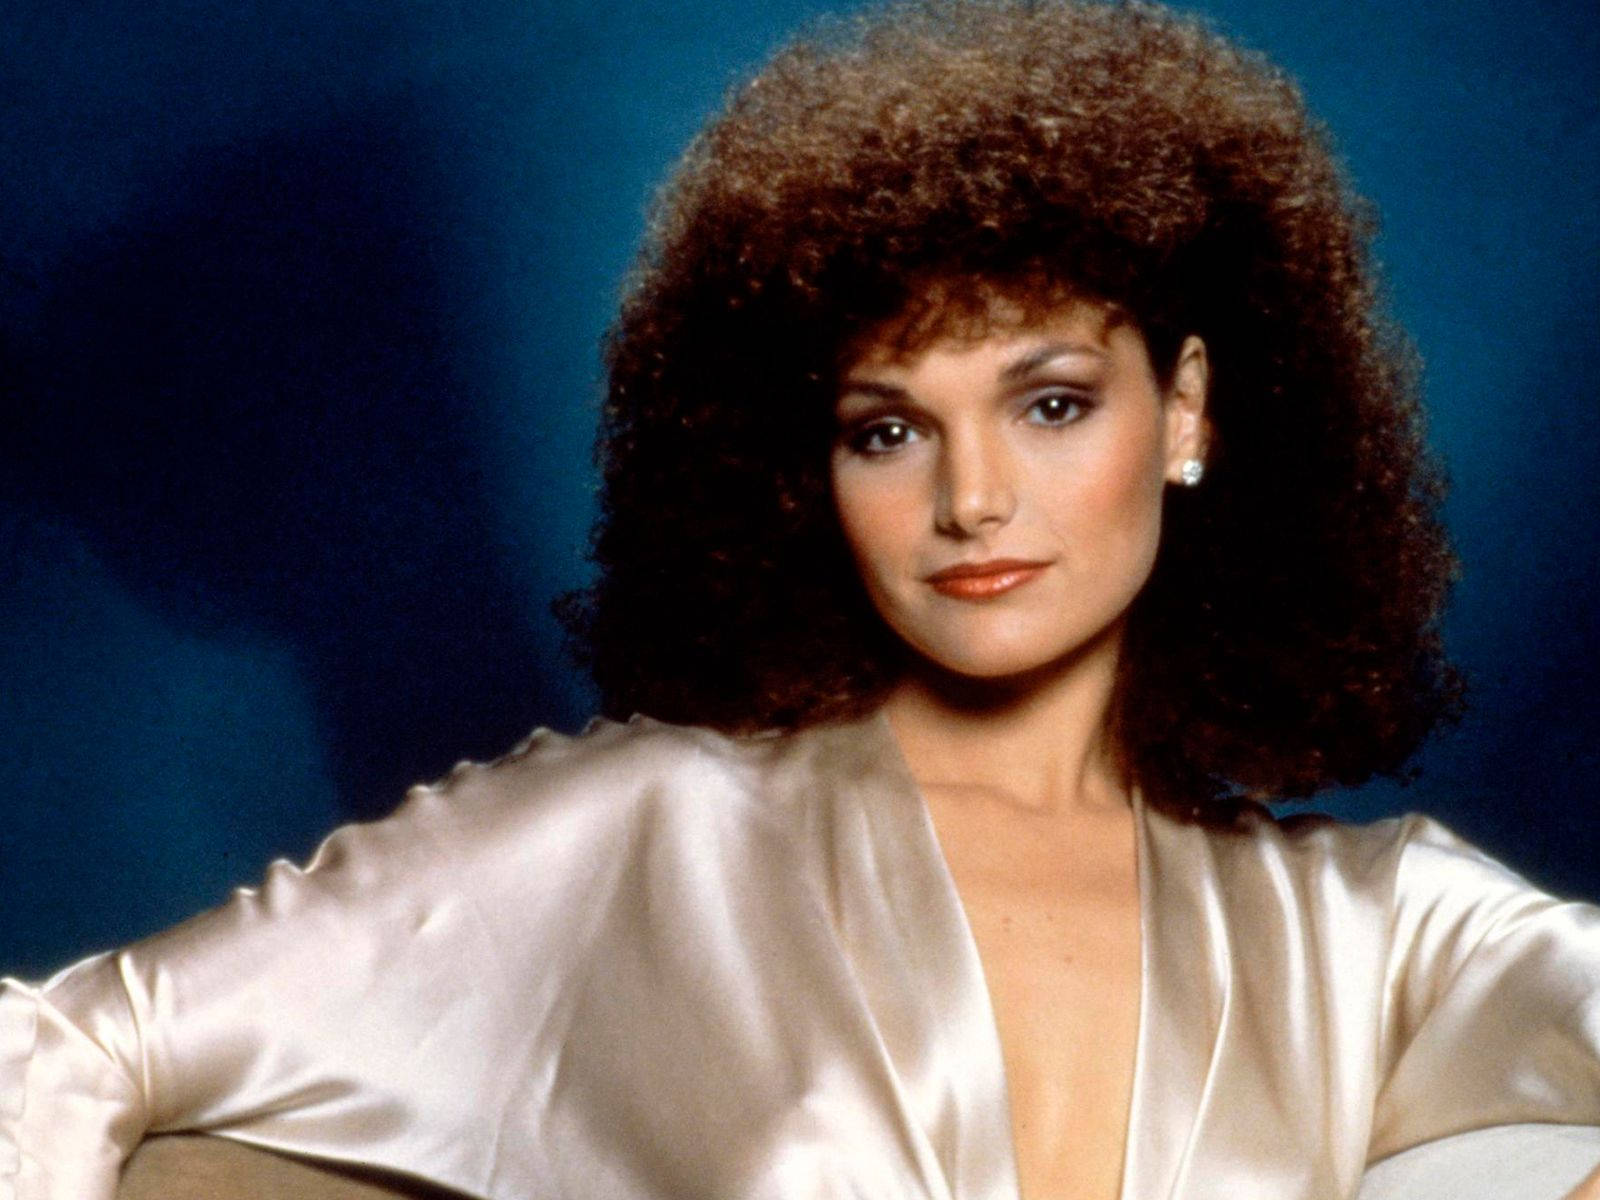 Maryelizabeth Mastrantonio I Vit Silke. (this Could Be A Suggestion Or Description For A Wallpaper Featuring Mary Elizabeth Mastrantonio In A White Silk Outfit.) Wallpaper